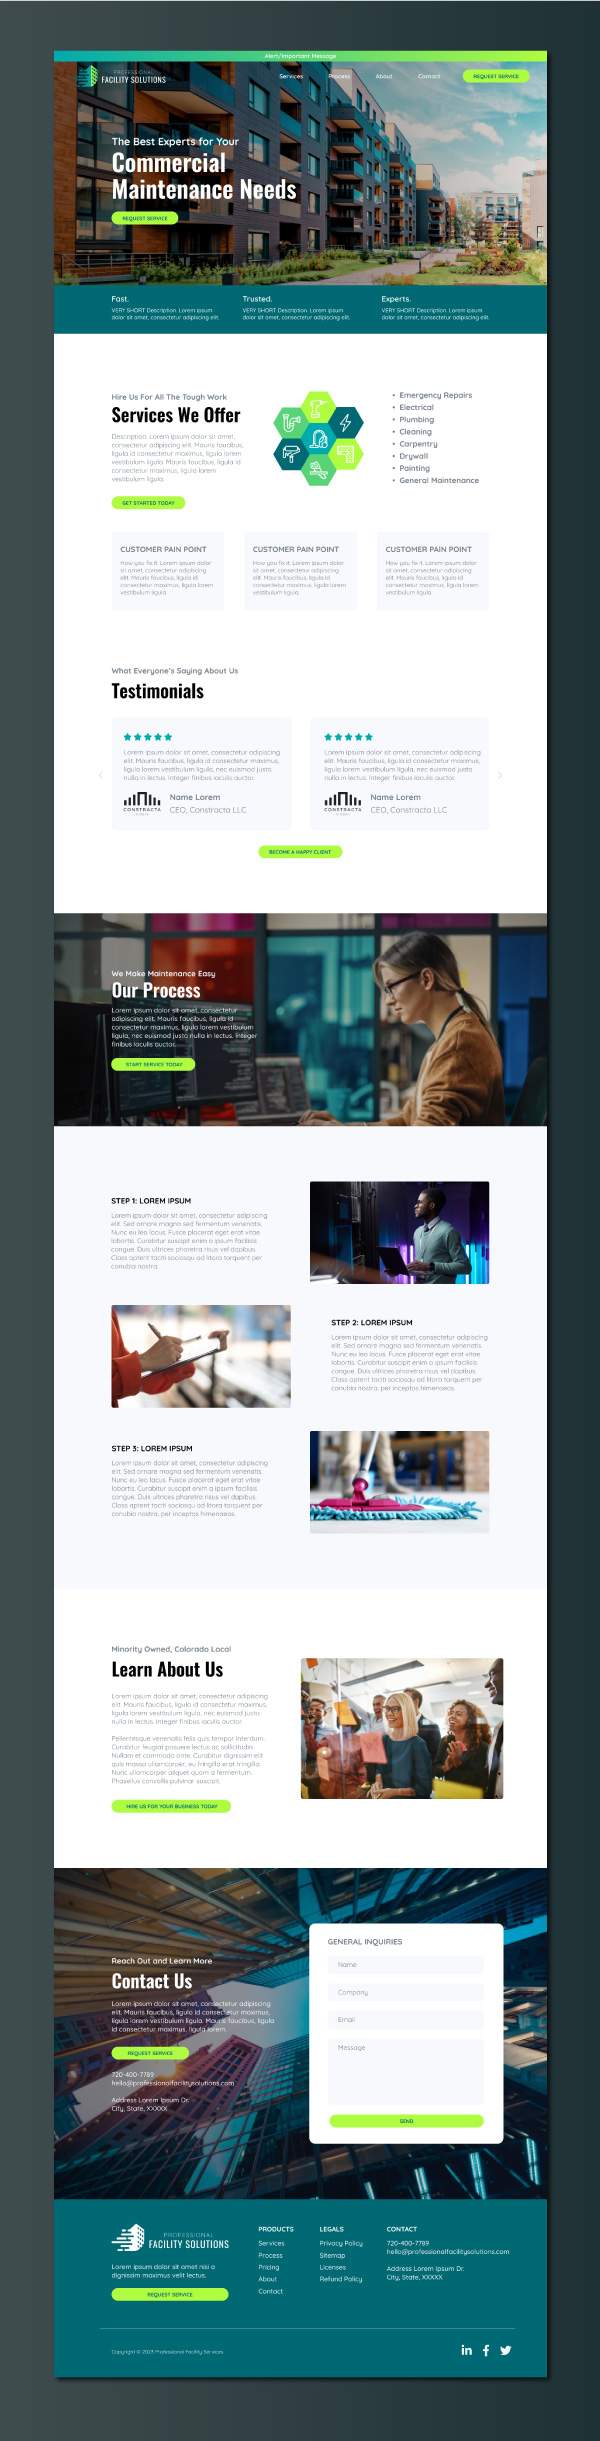 A web design for the company Professional Facility Solutions